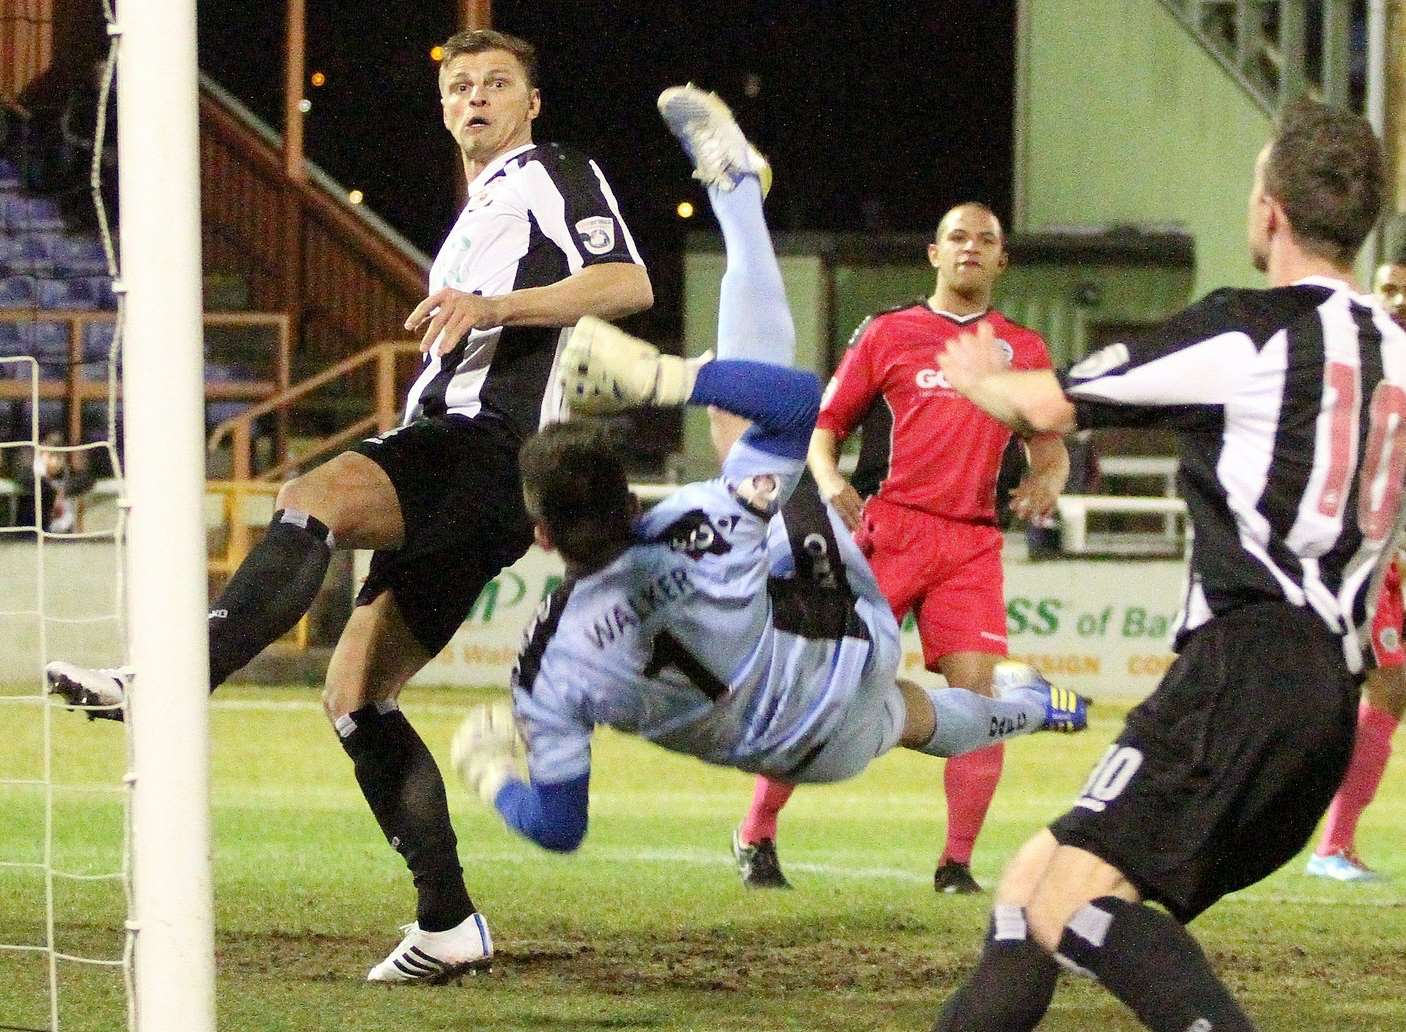 Dover goalkeeper Mitch Walker in the thick of the action at Bath City on Tuesday Picture: Simon Howe/Bath City FC